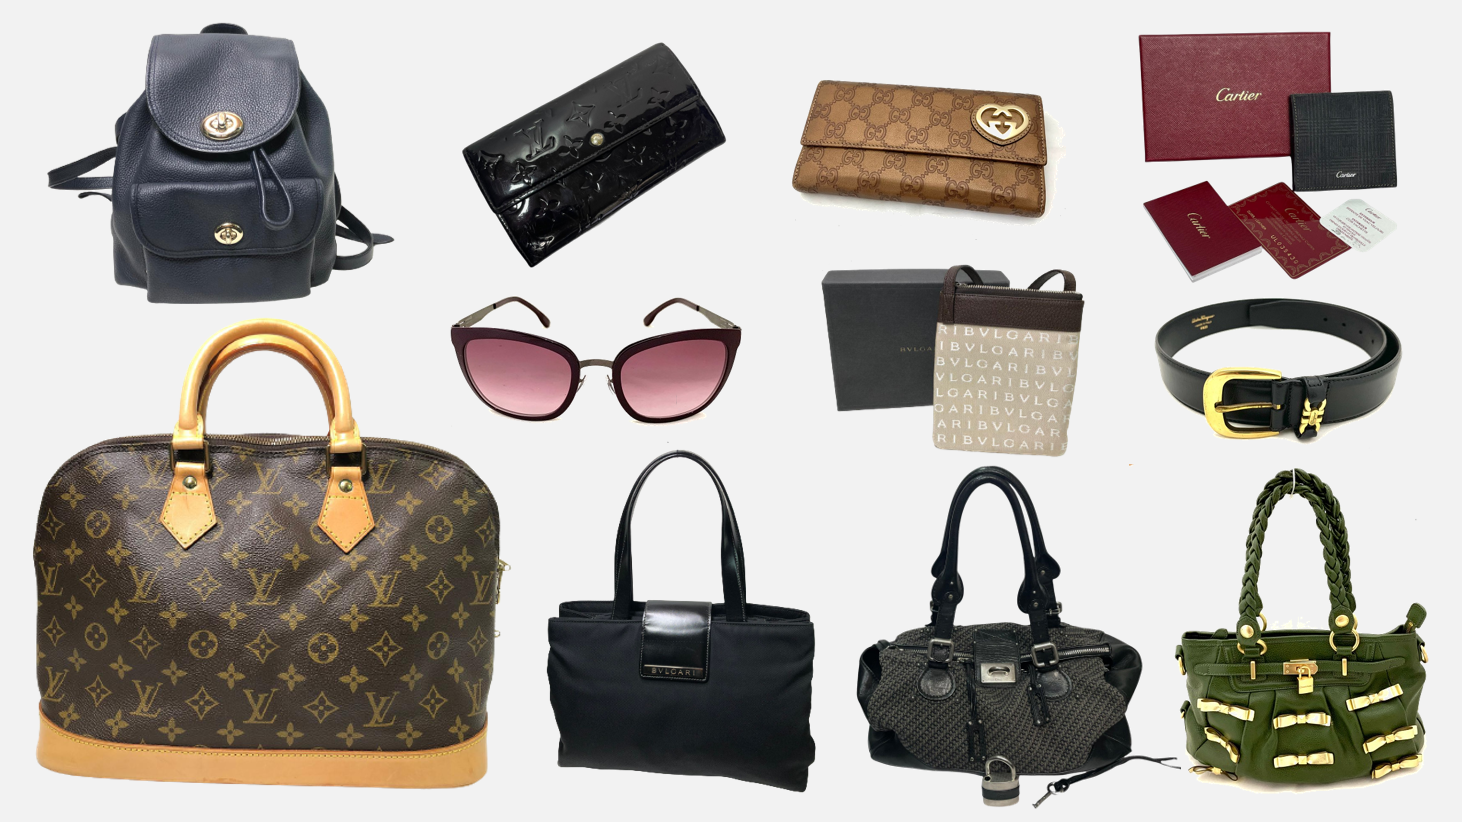 BRANDED BAGS & ACCESSORIES